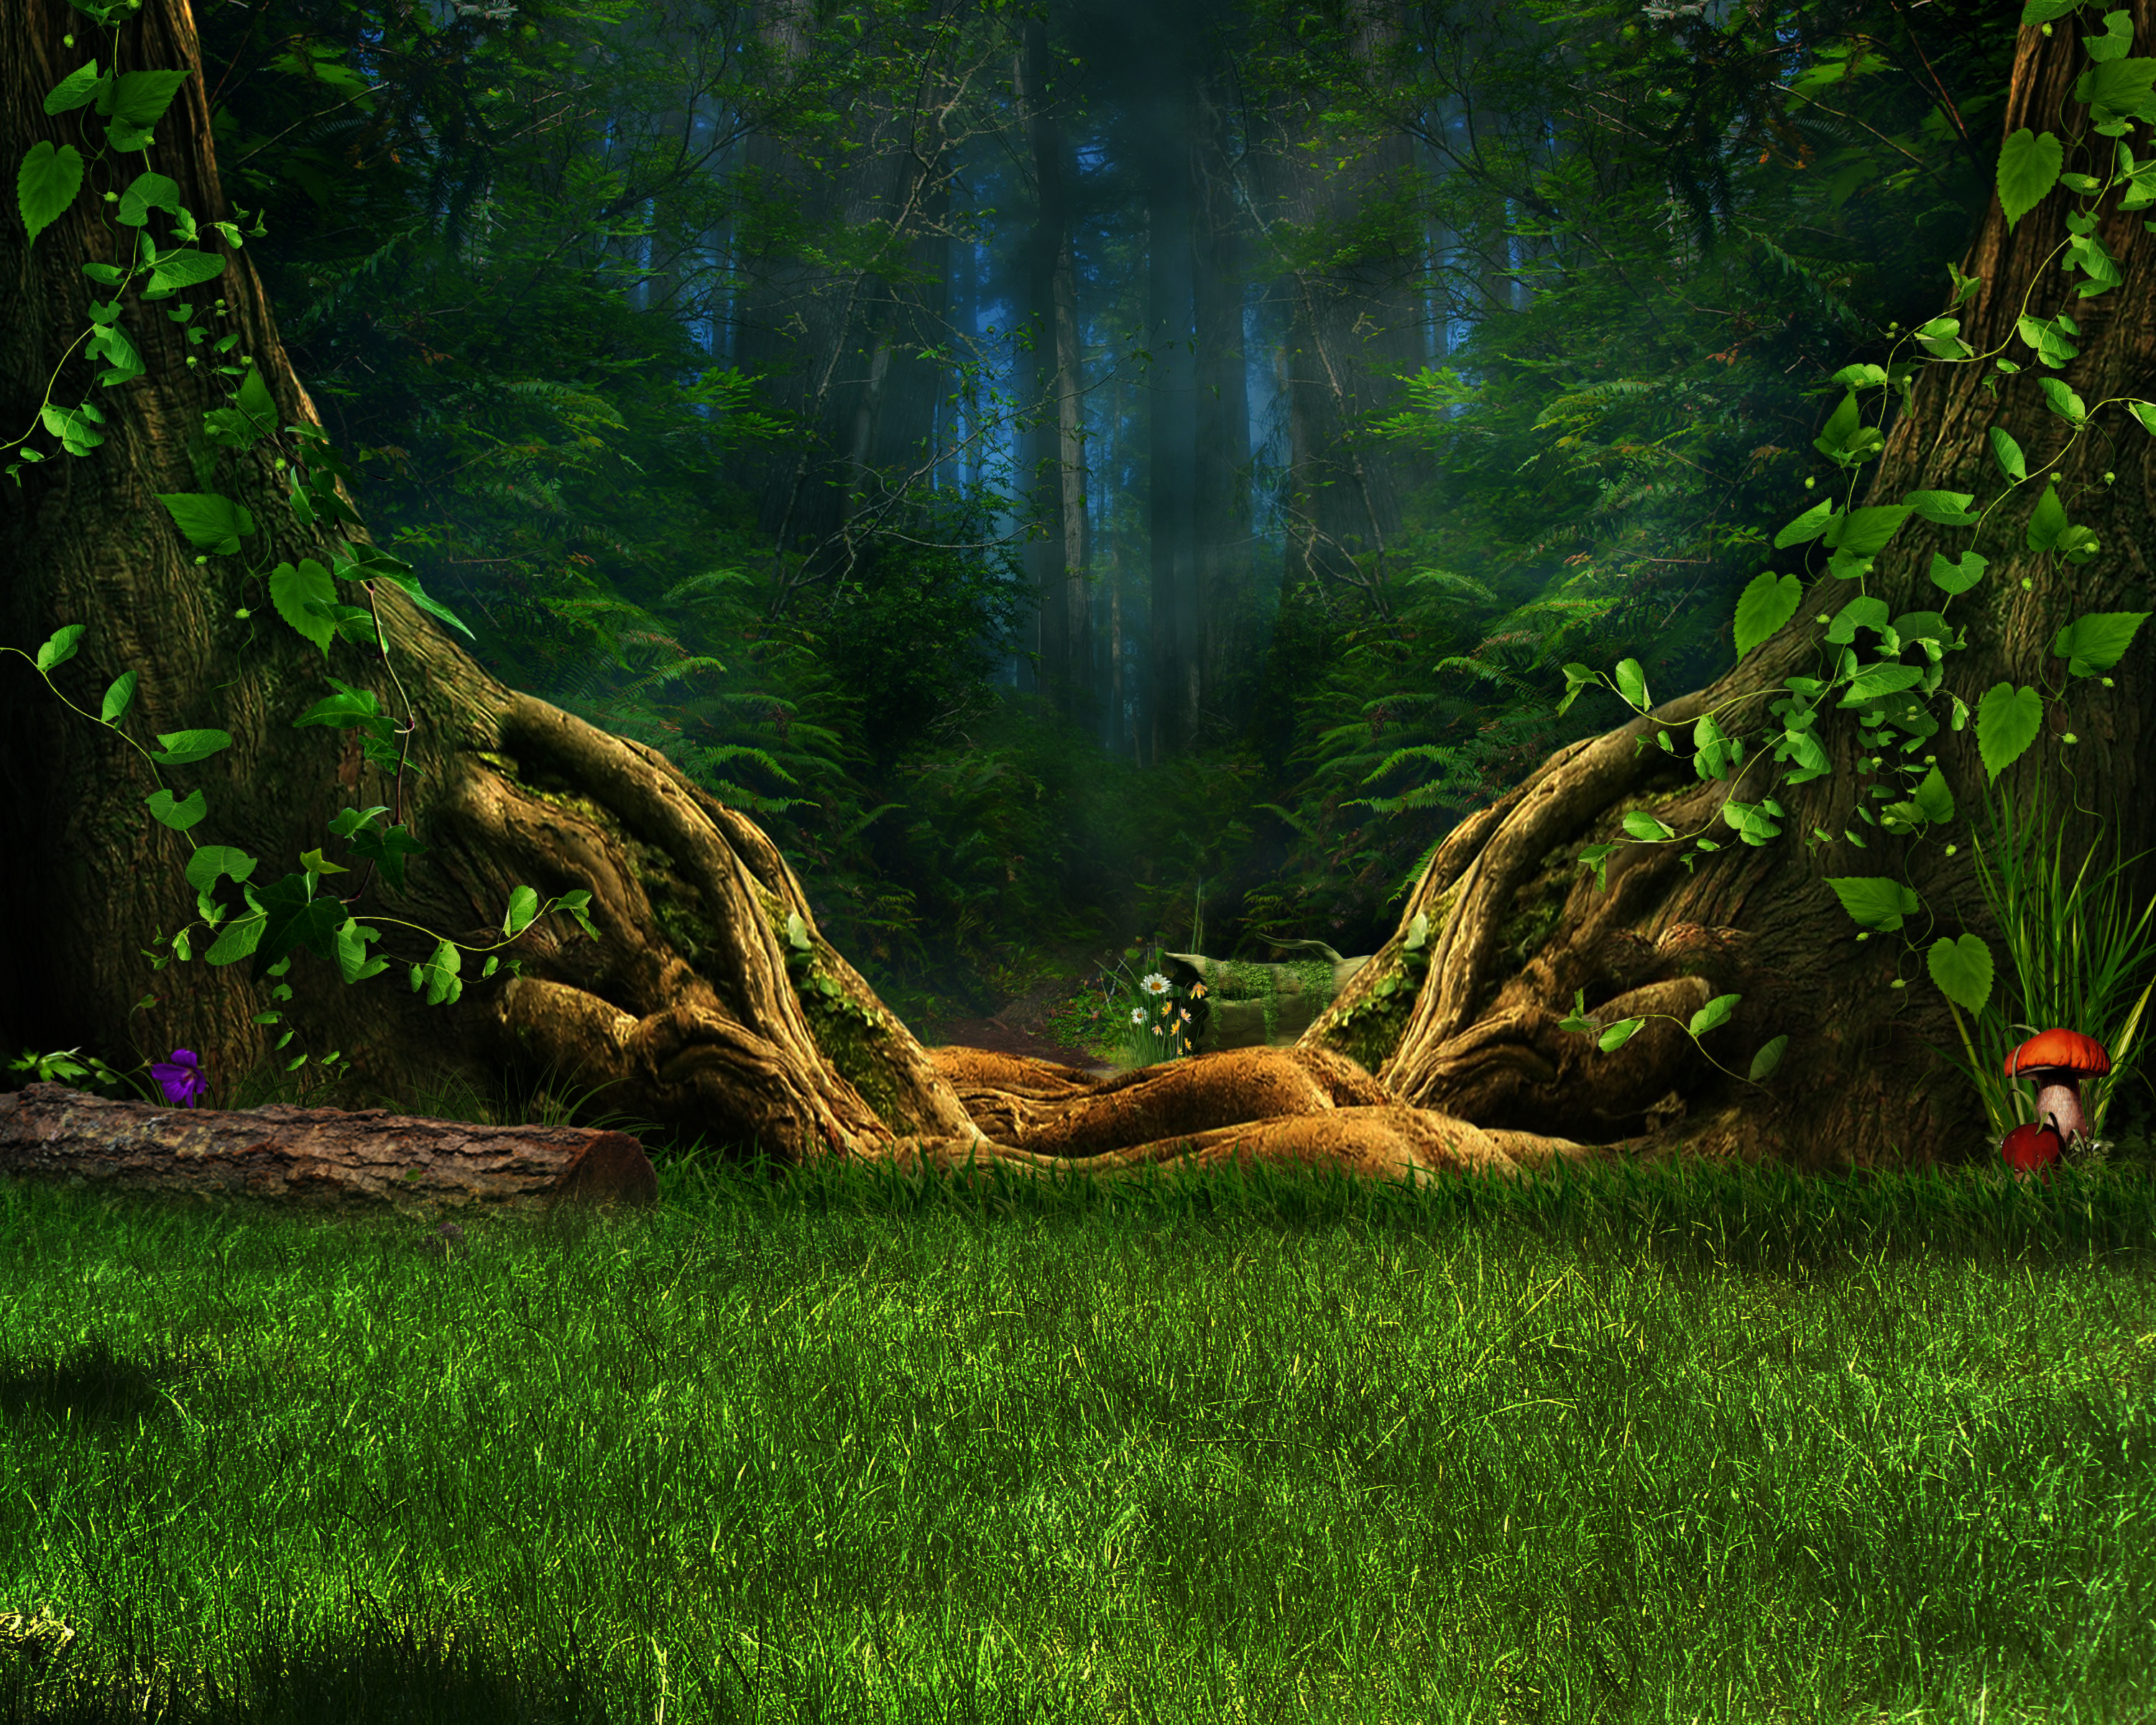 enchanted forest hd wallpaper background image 3000x2400 id 688657 wallpaper abyss enchanted forest hd wallpaper